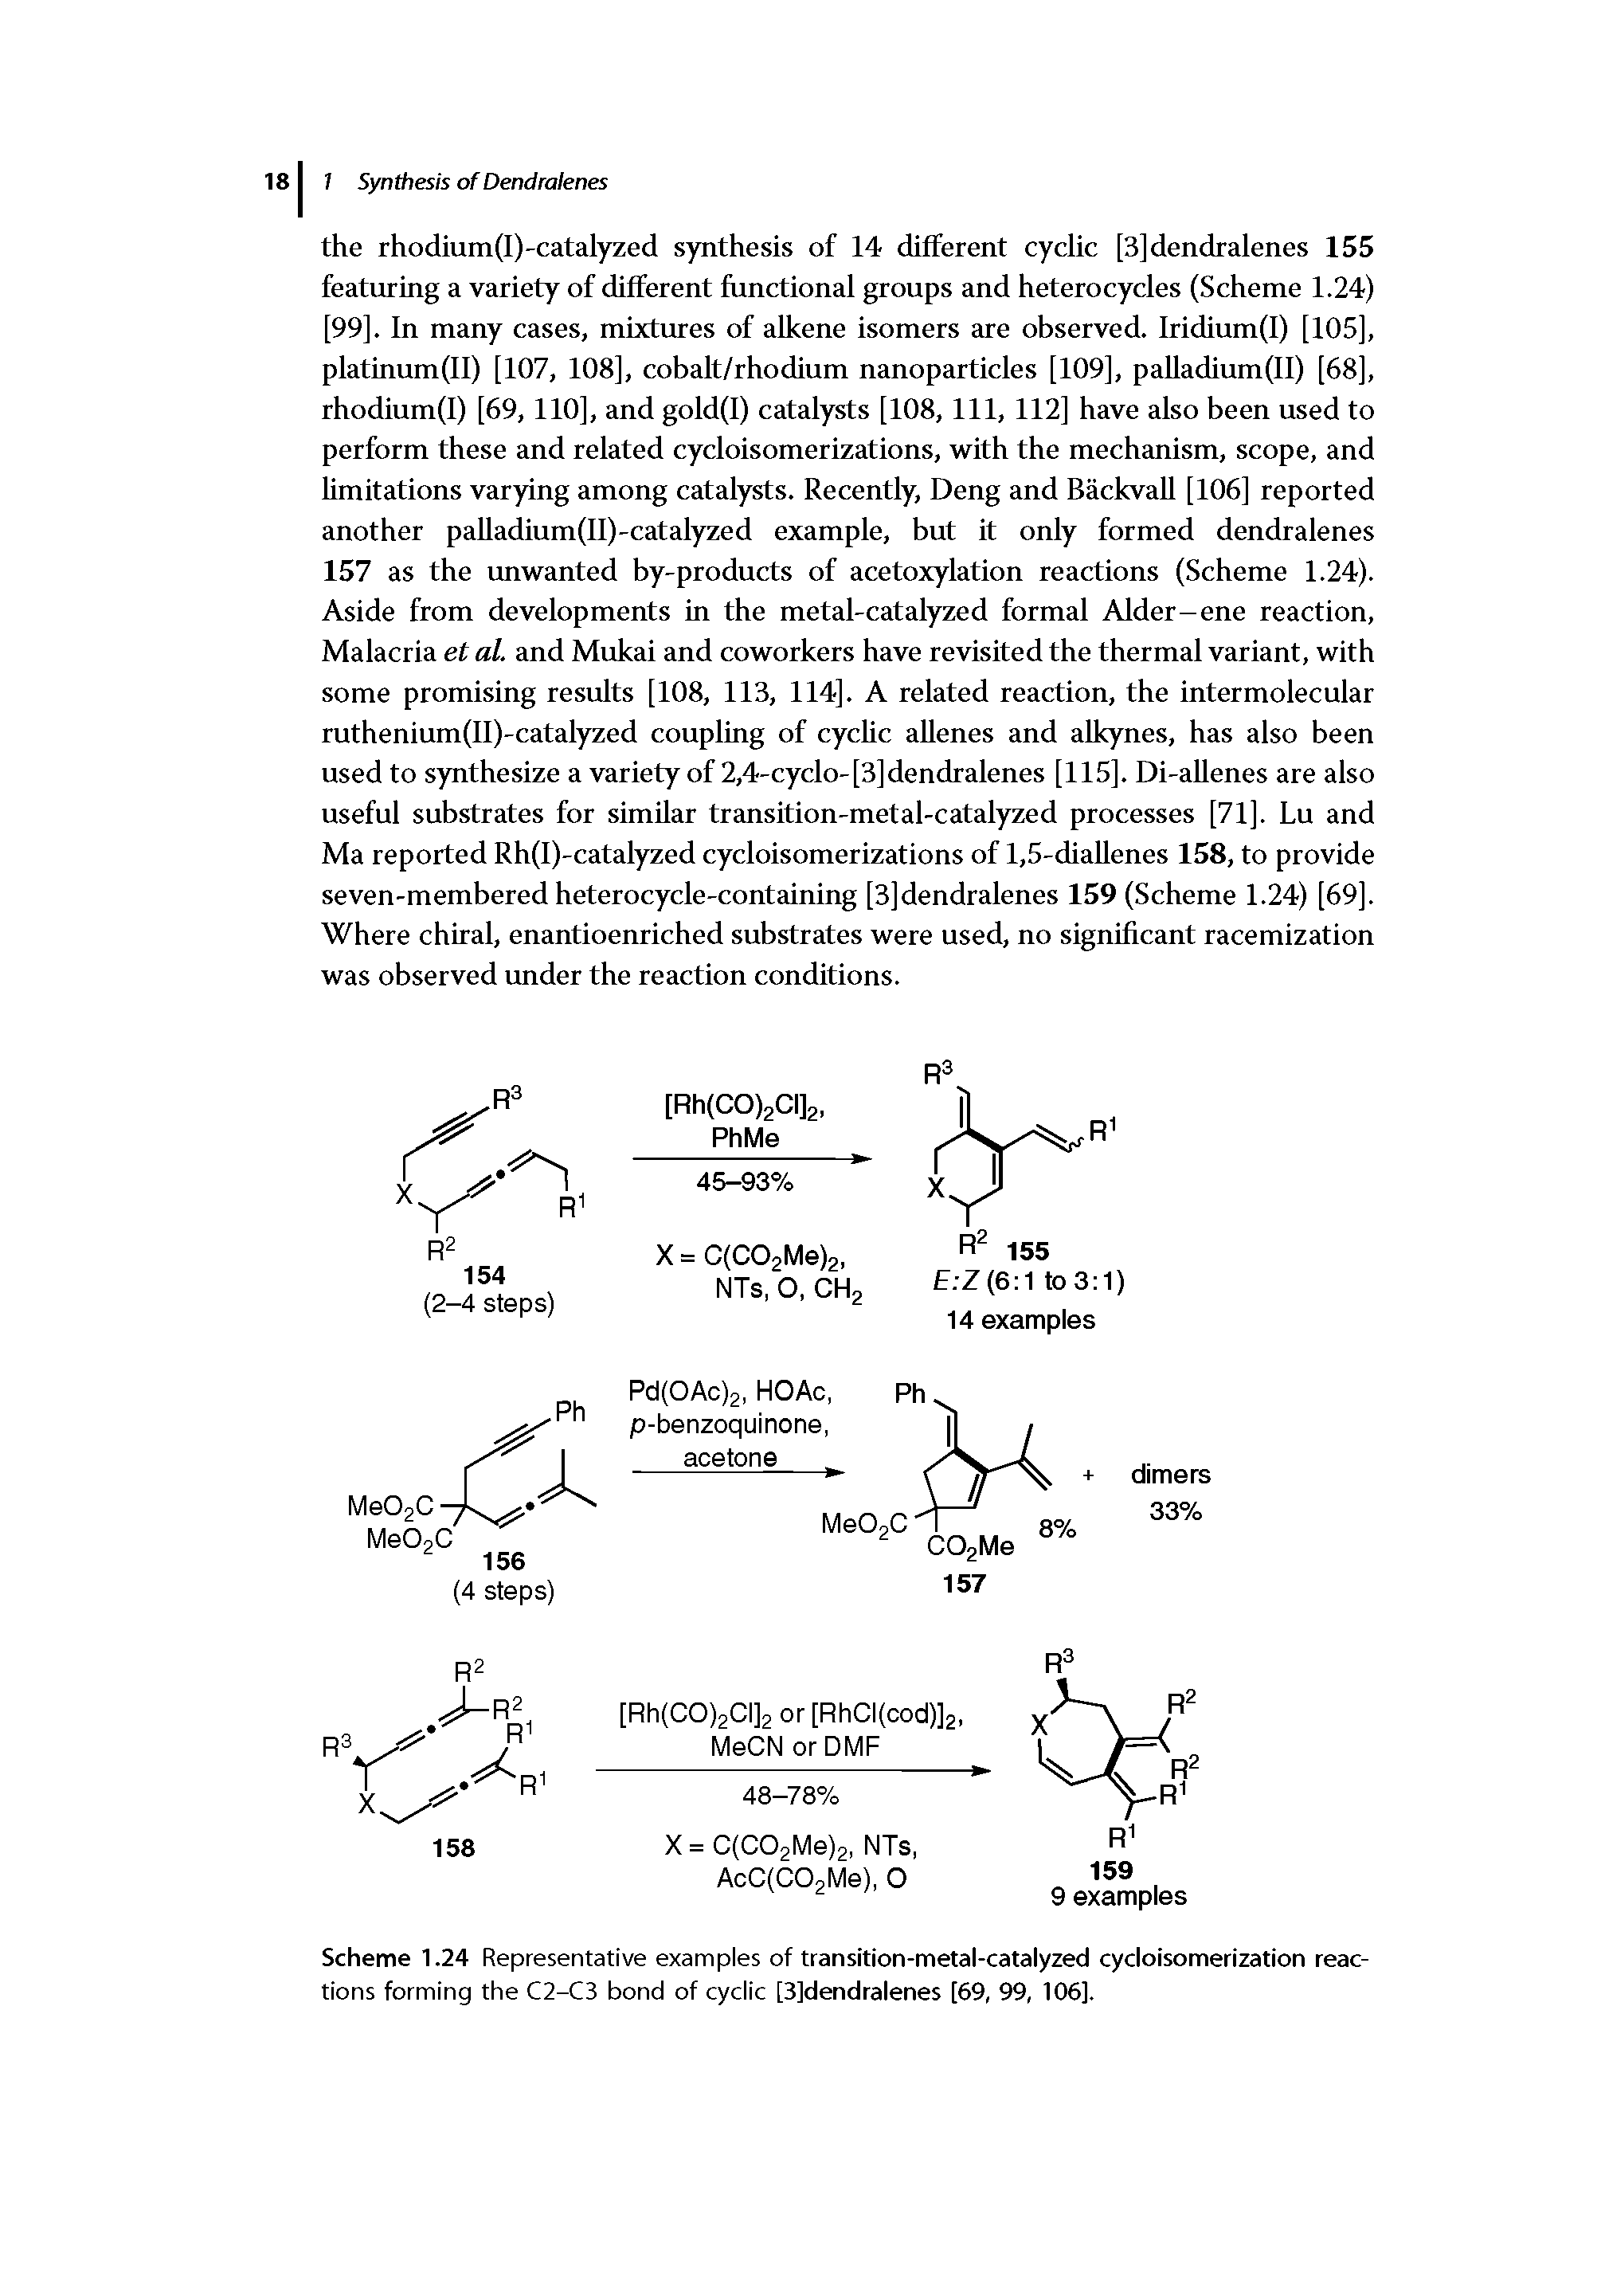 Scheme 1.24 Representative examples of transition-metal-catalyzed cycloisomerization reactions forming the C2-C3 bond of cyclic [3]dendralenes [69, 99, 106].